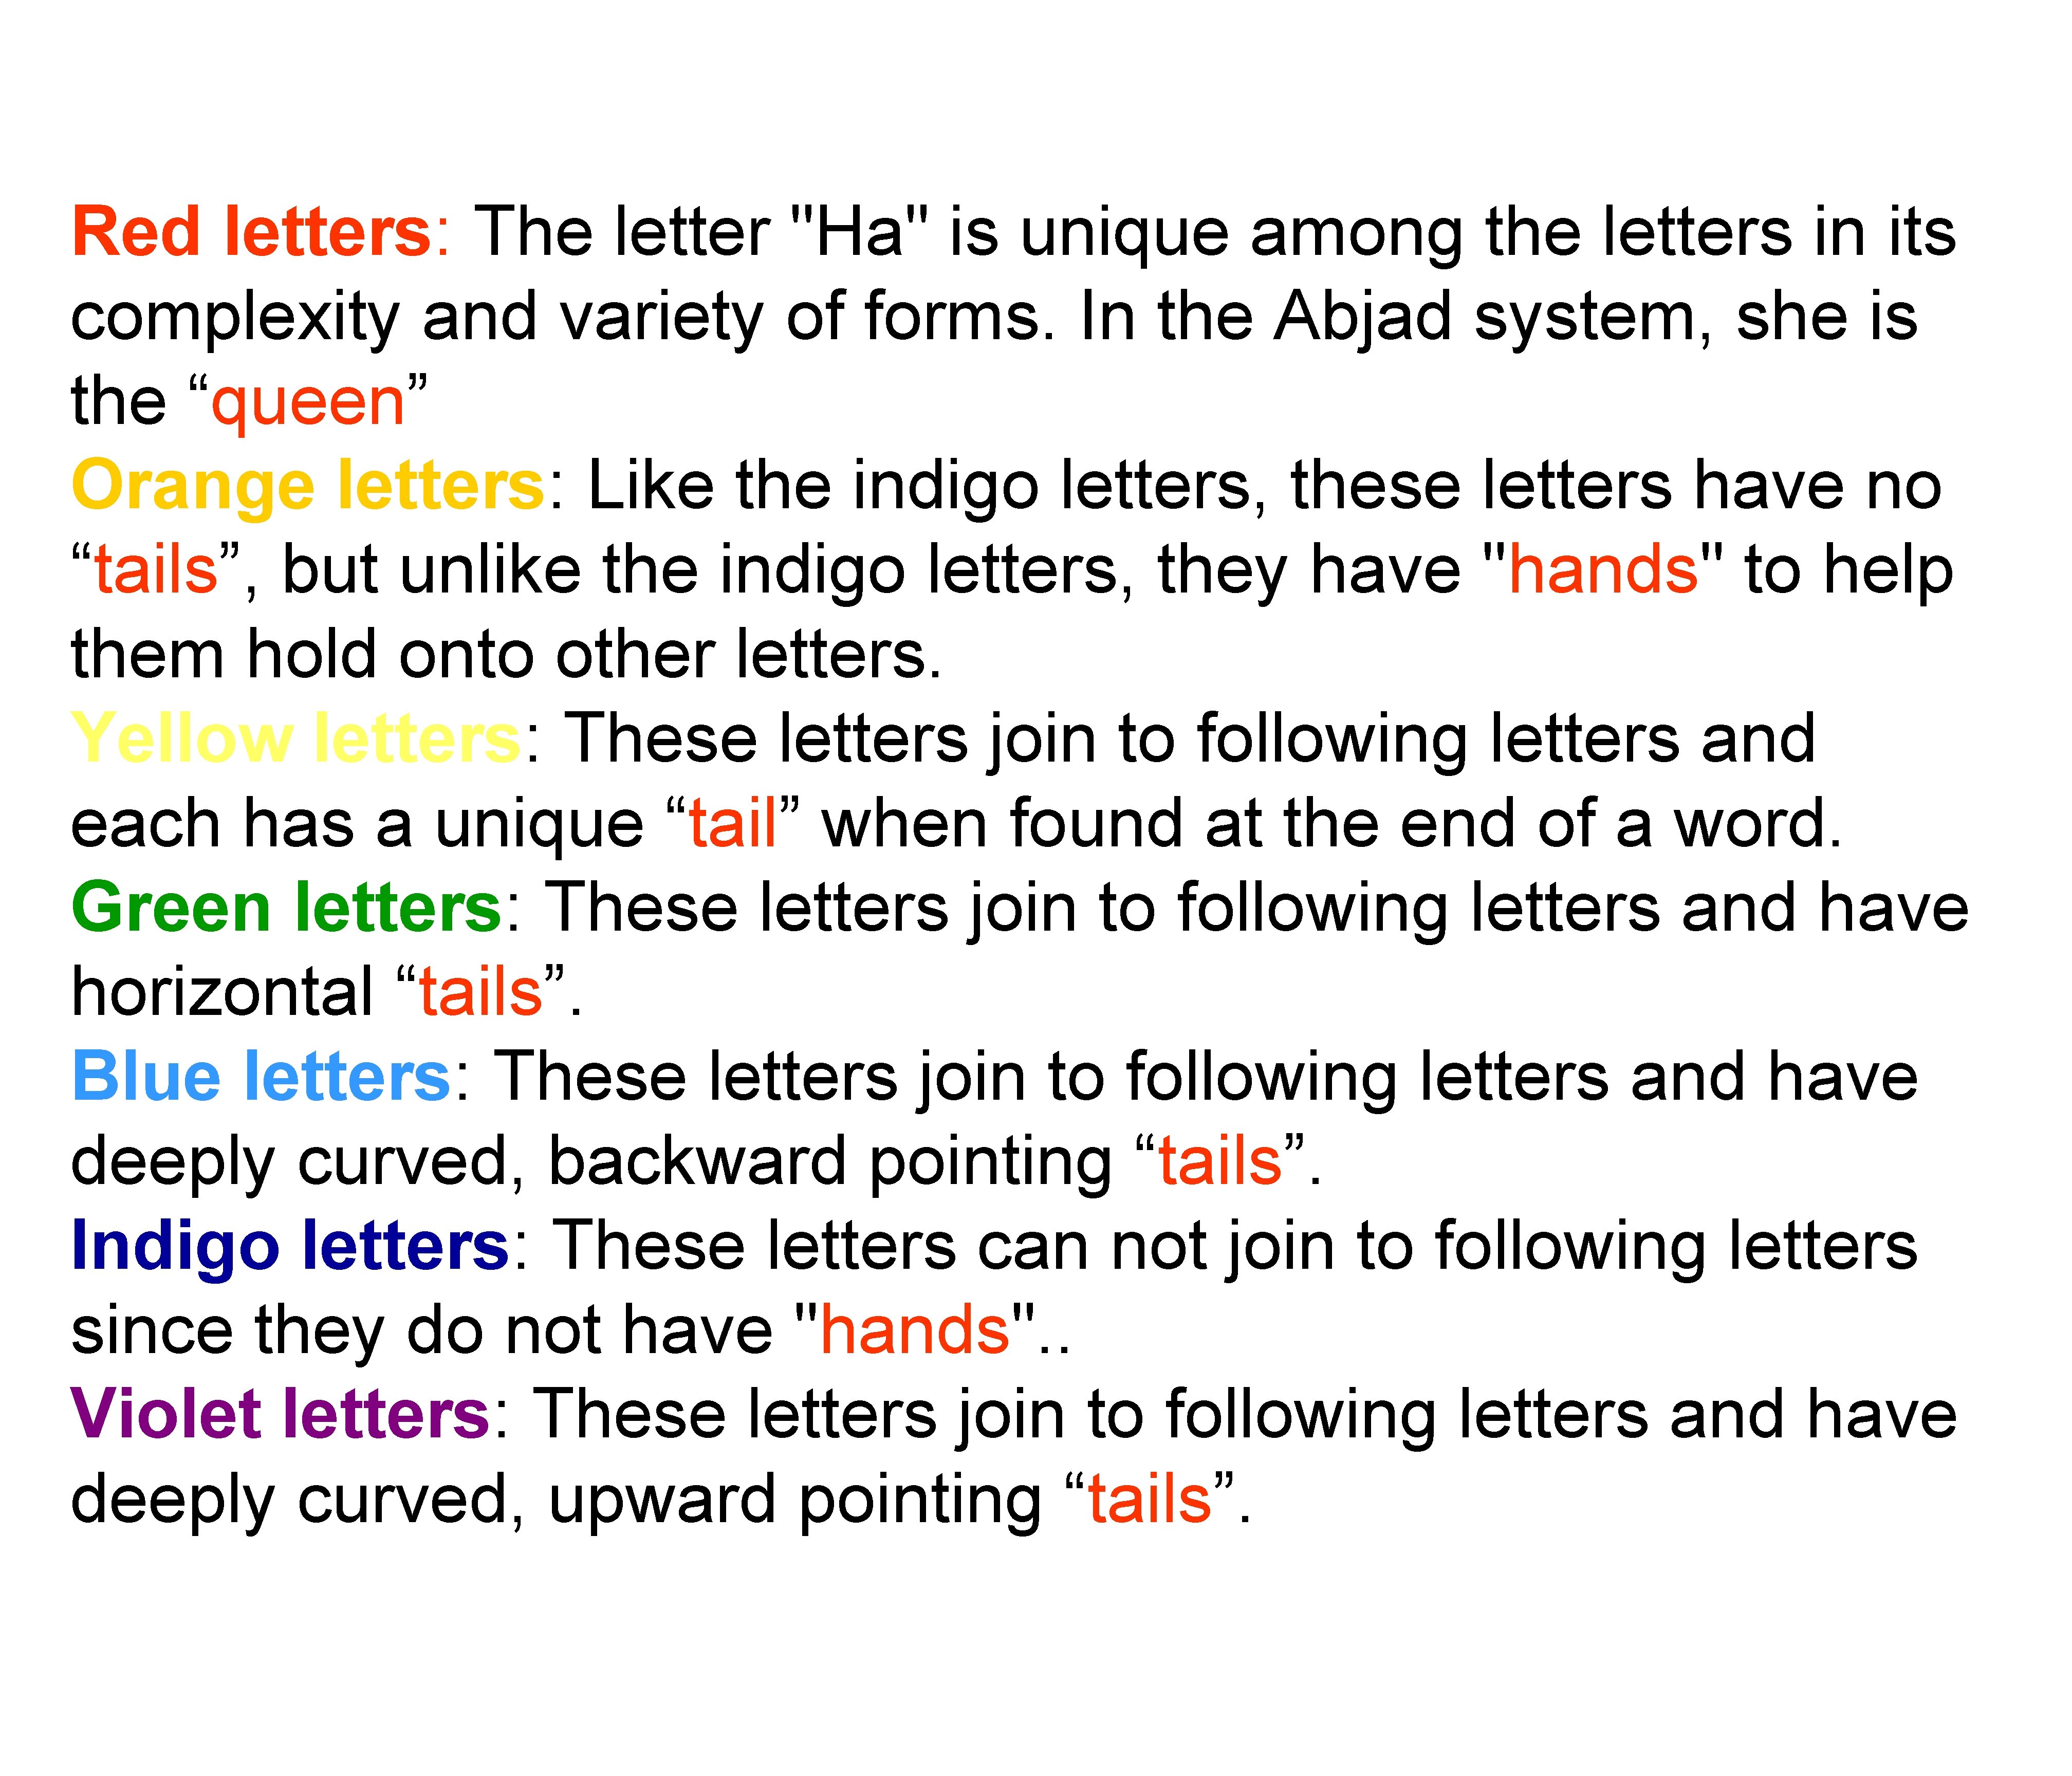 Red letters: The letter "Ha" is unique among the letters in its complexity and